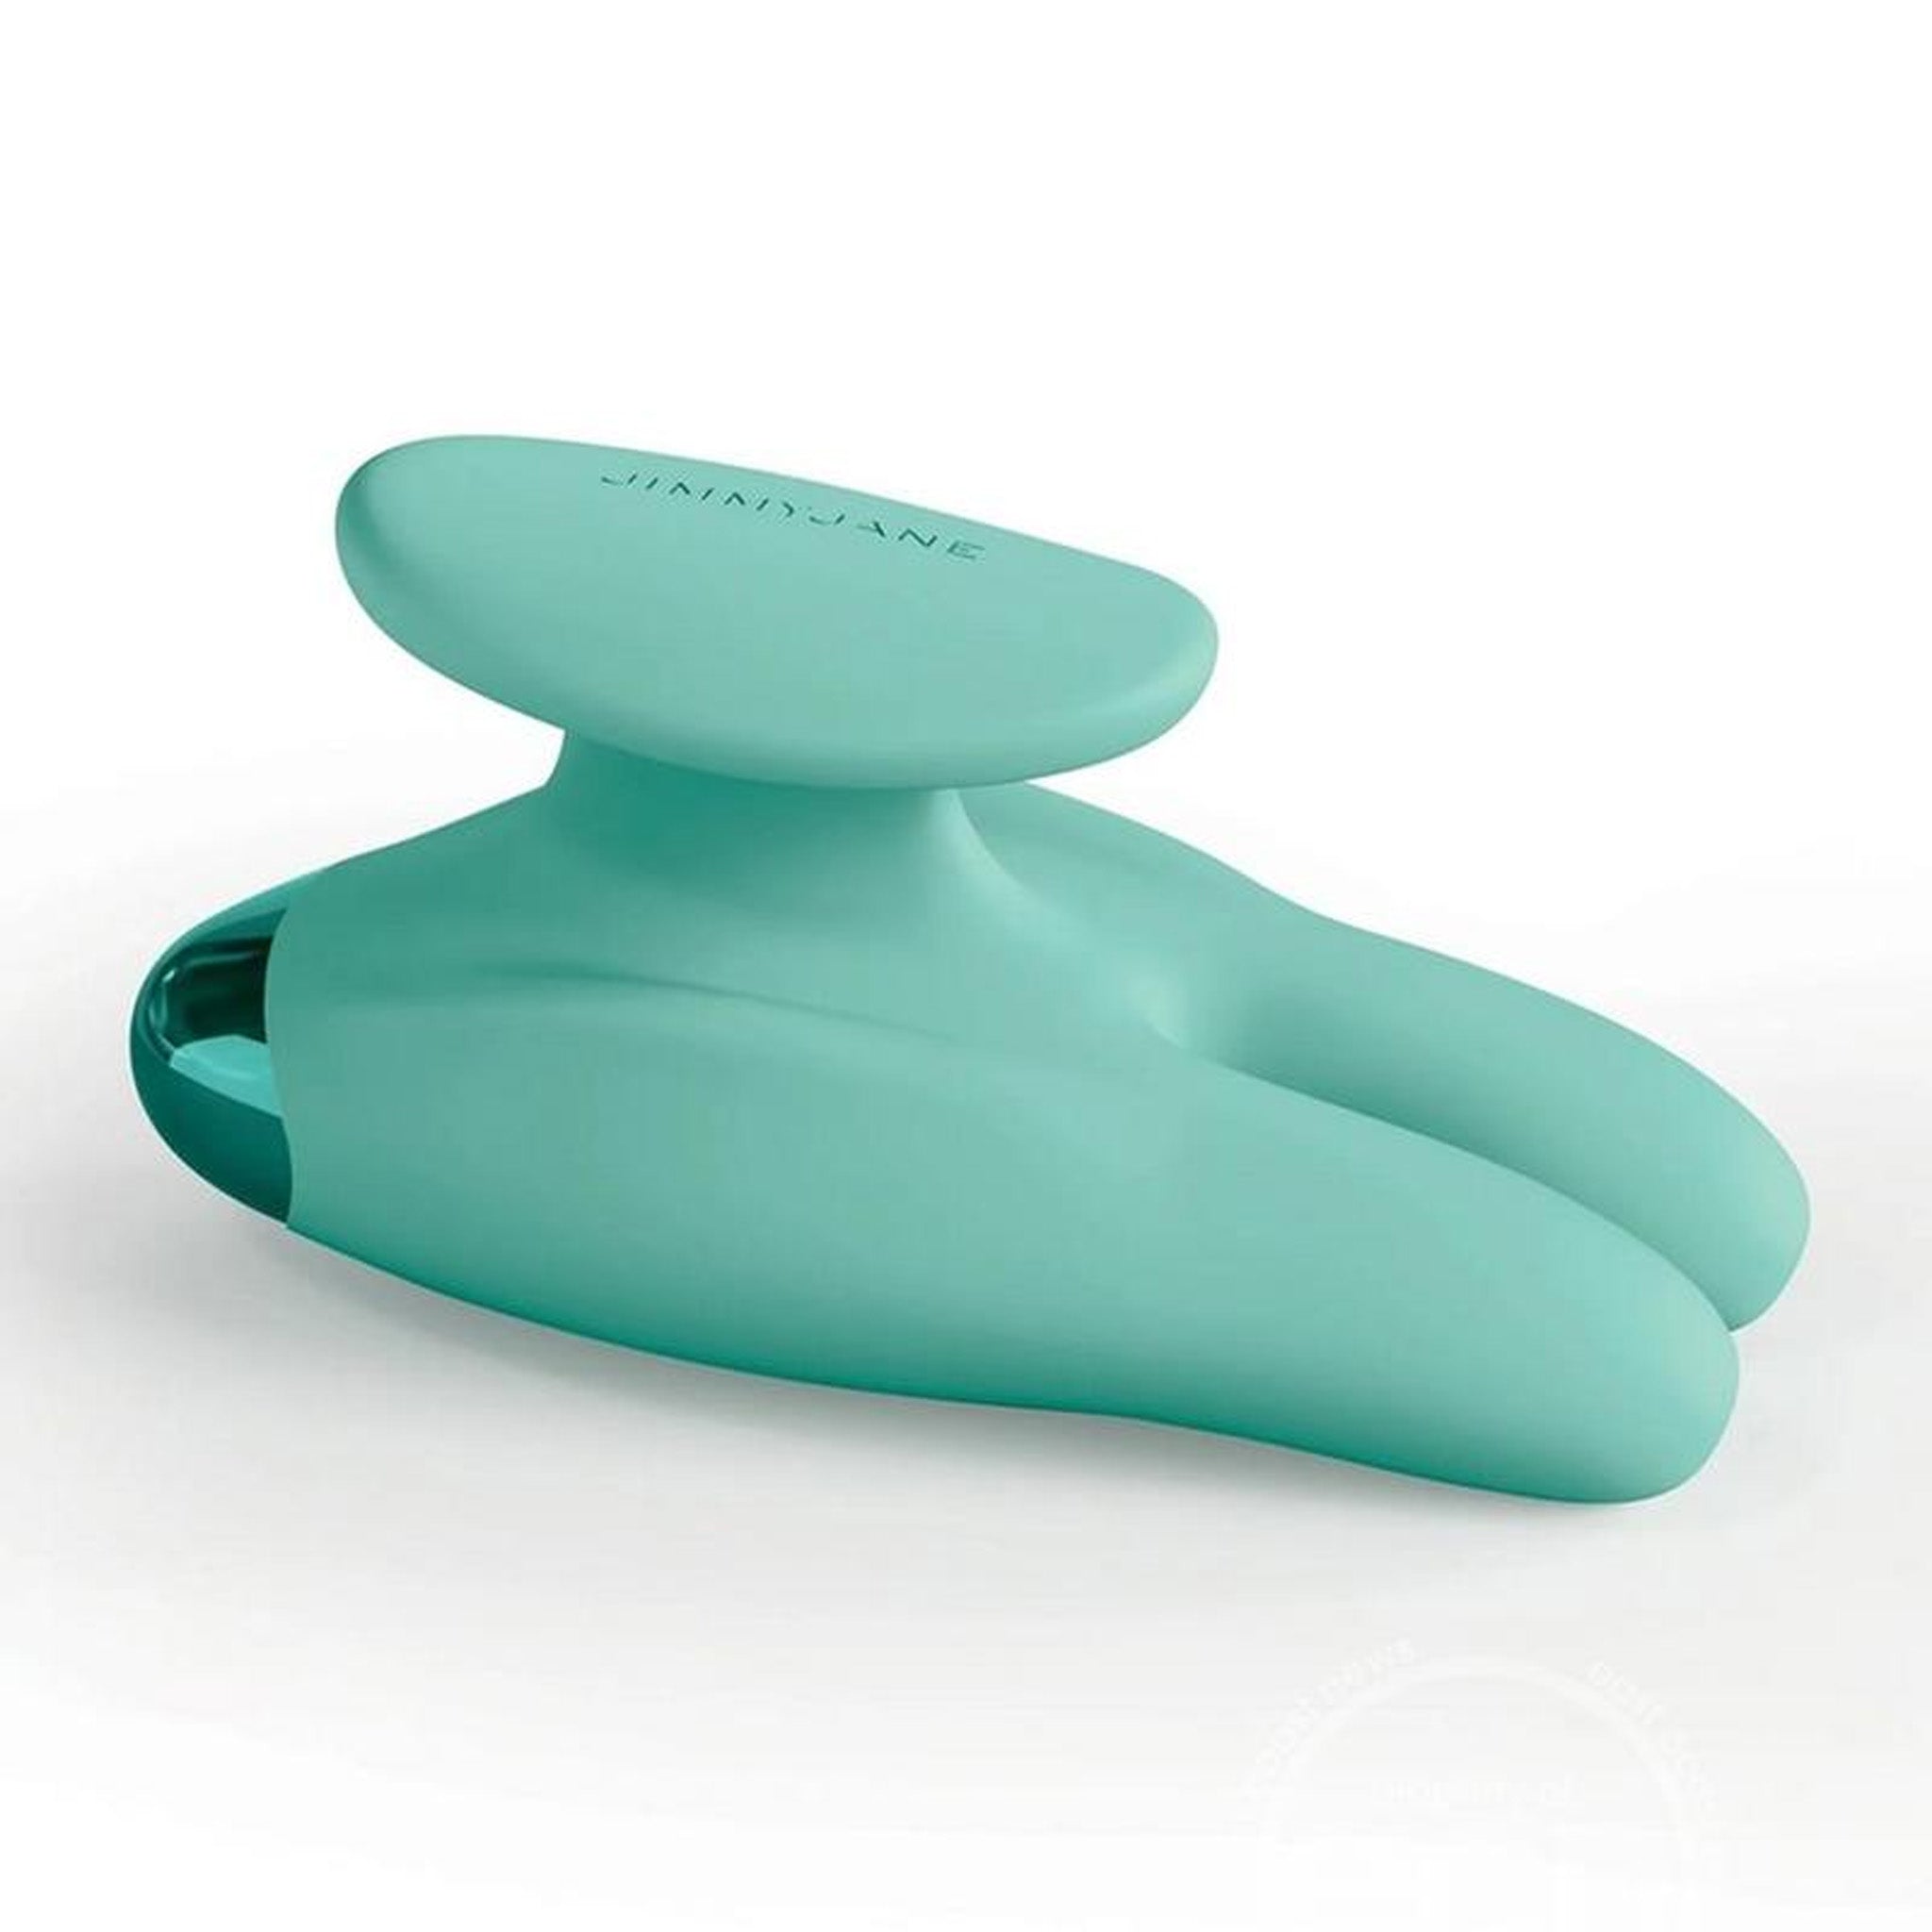 Bunny Ears Finger Grip Rechargeable Vibrator - Teal